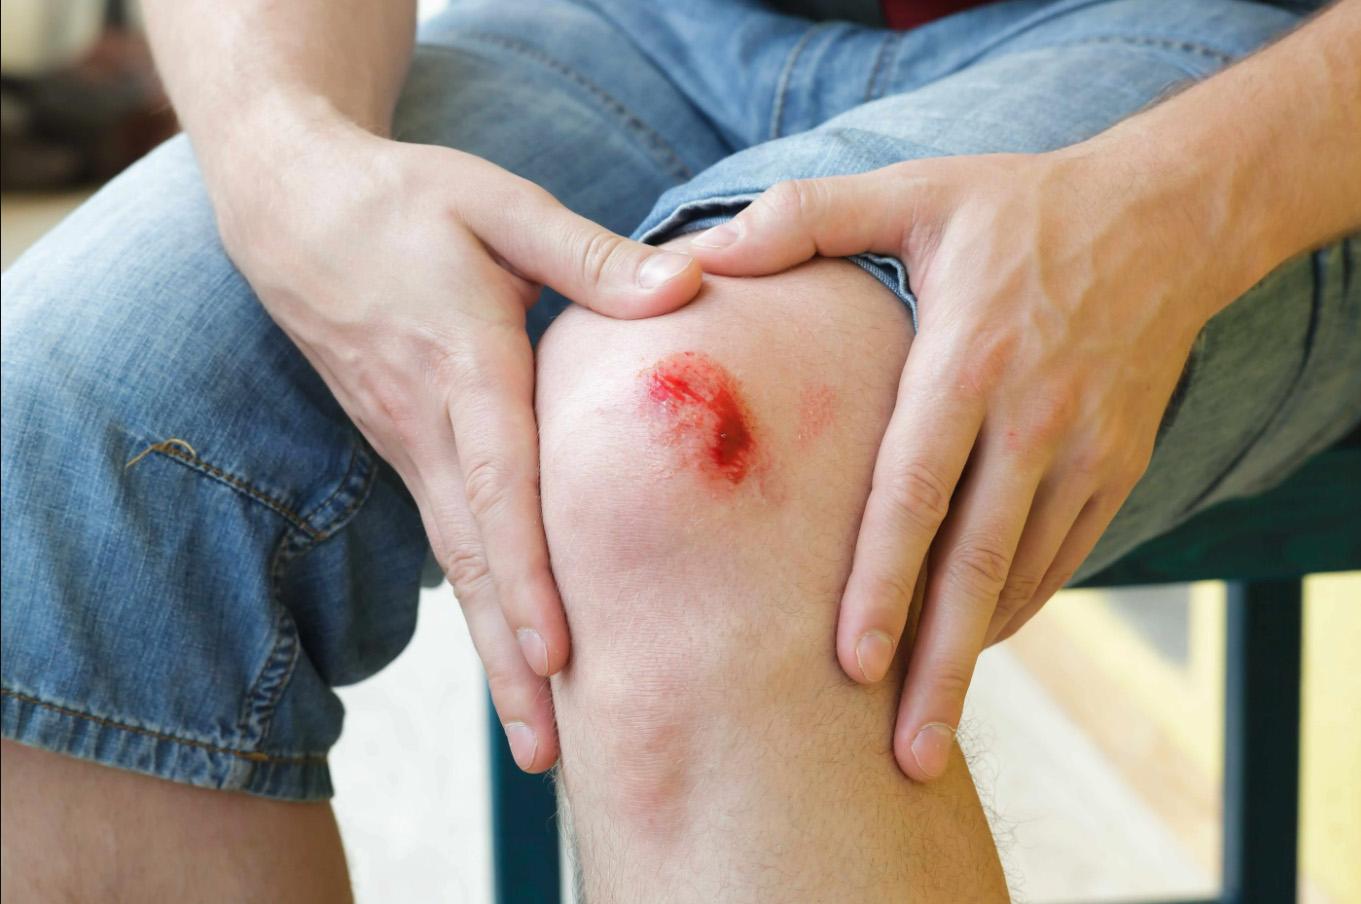 First Aid Essentials: How to Treat Scrapes, Cuts, and Minor Burns